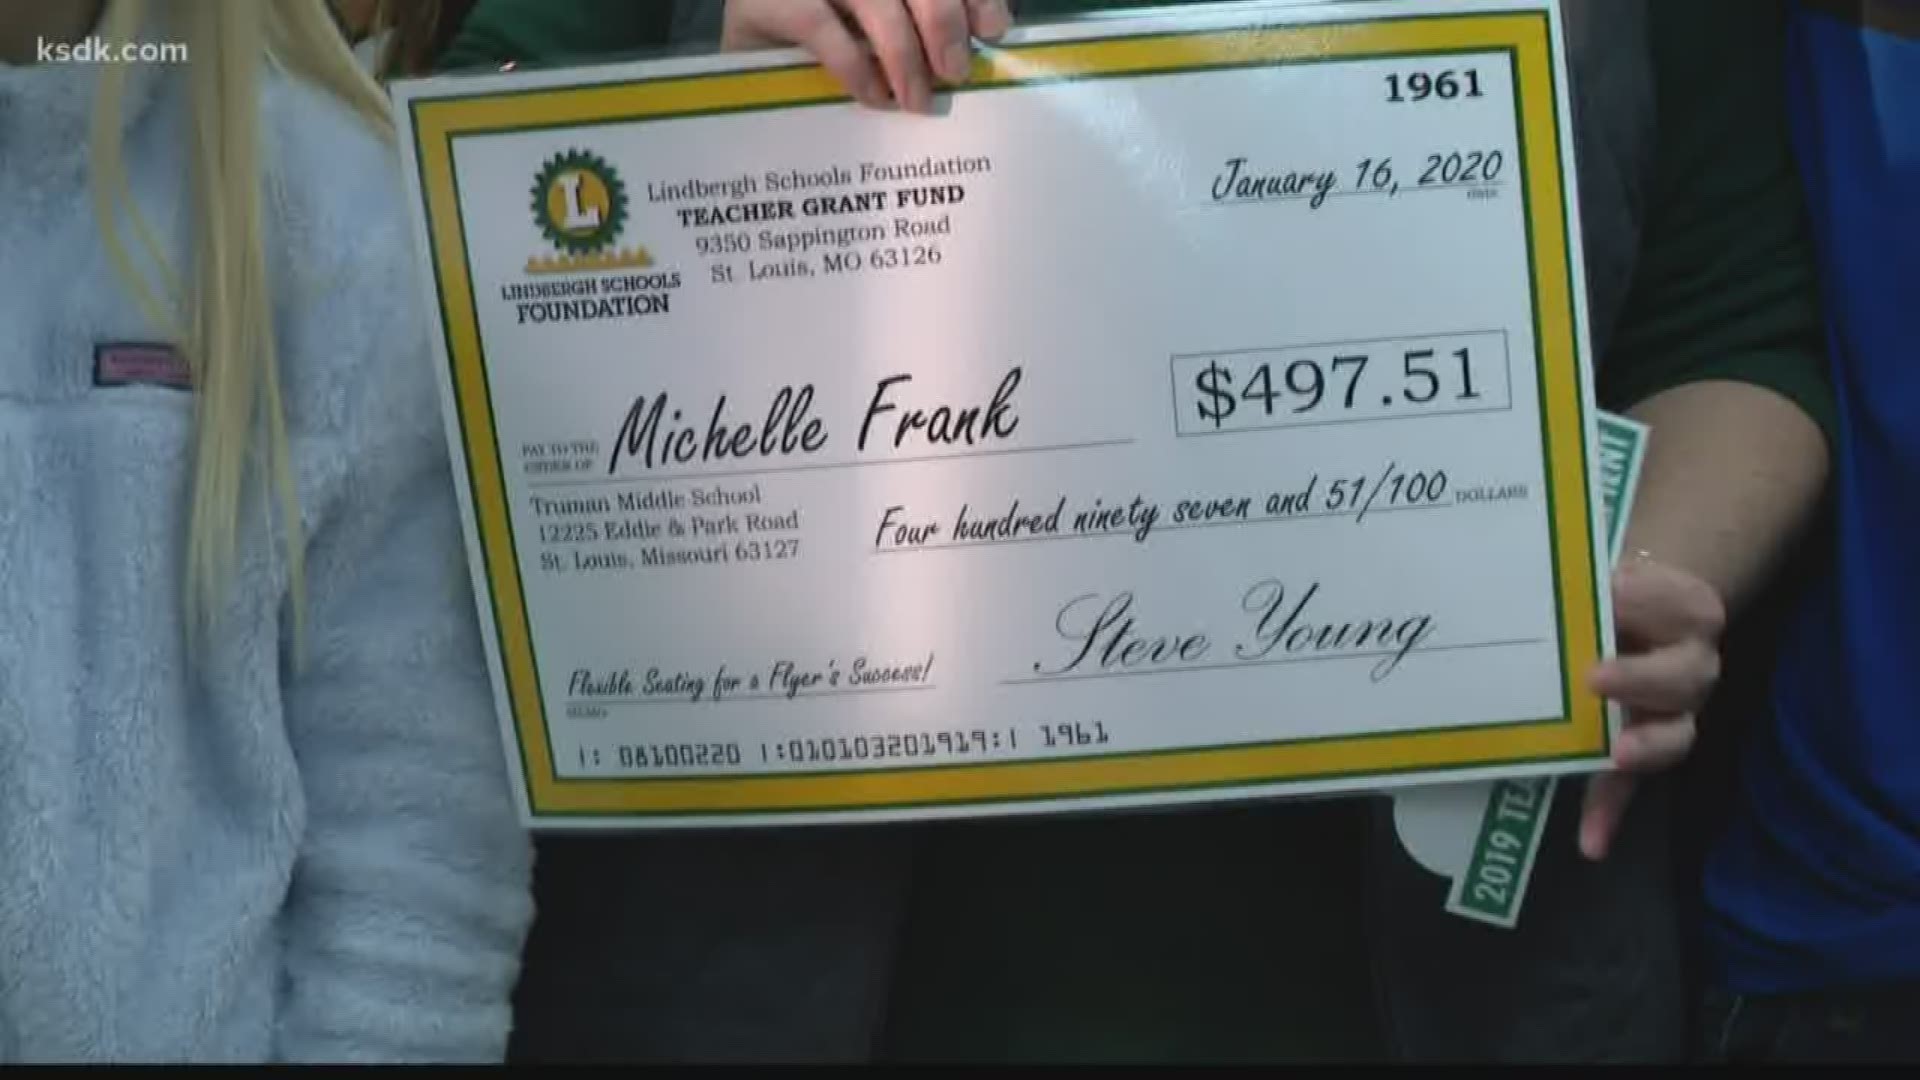 More than 60 teachers received $30,000 in grants for special initiatives in their classrooms.